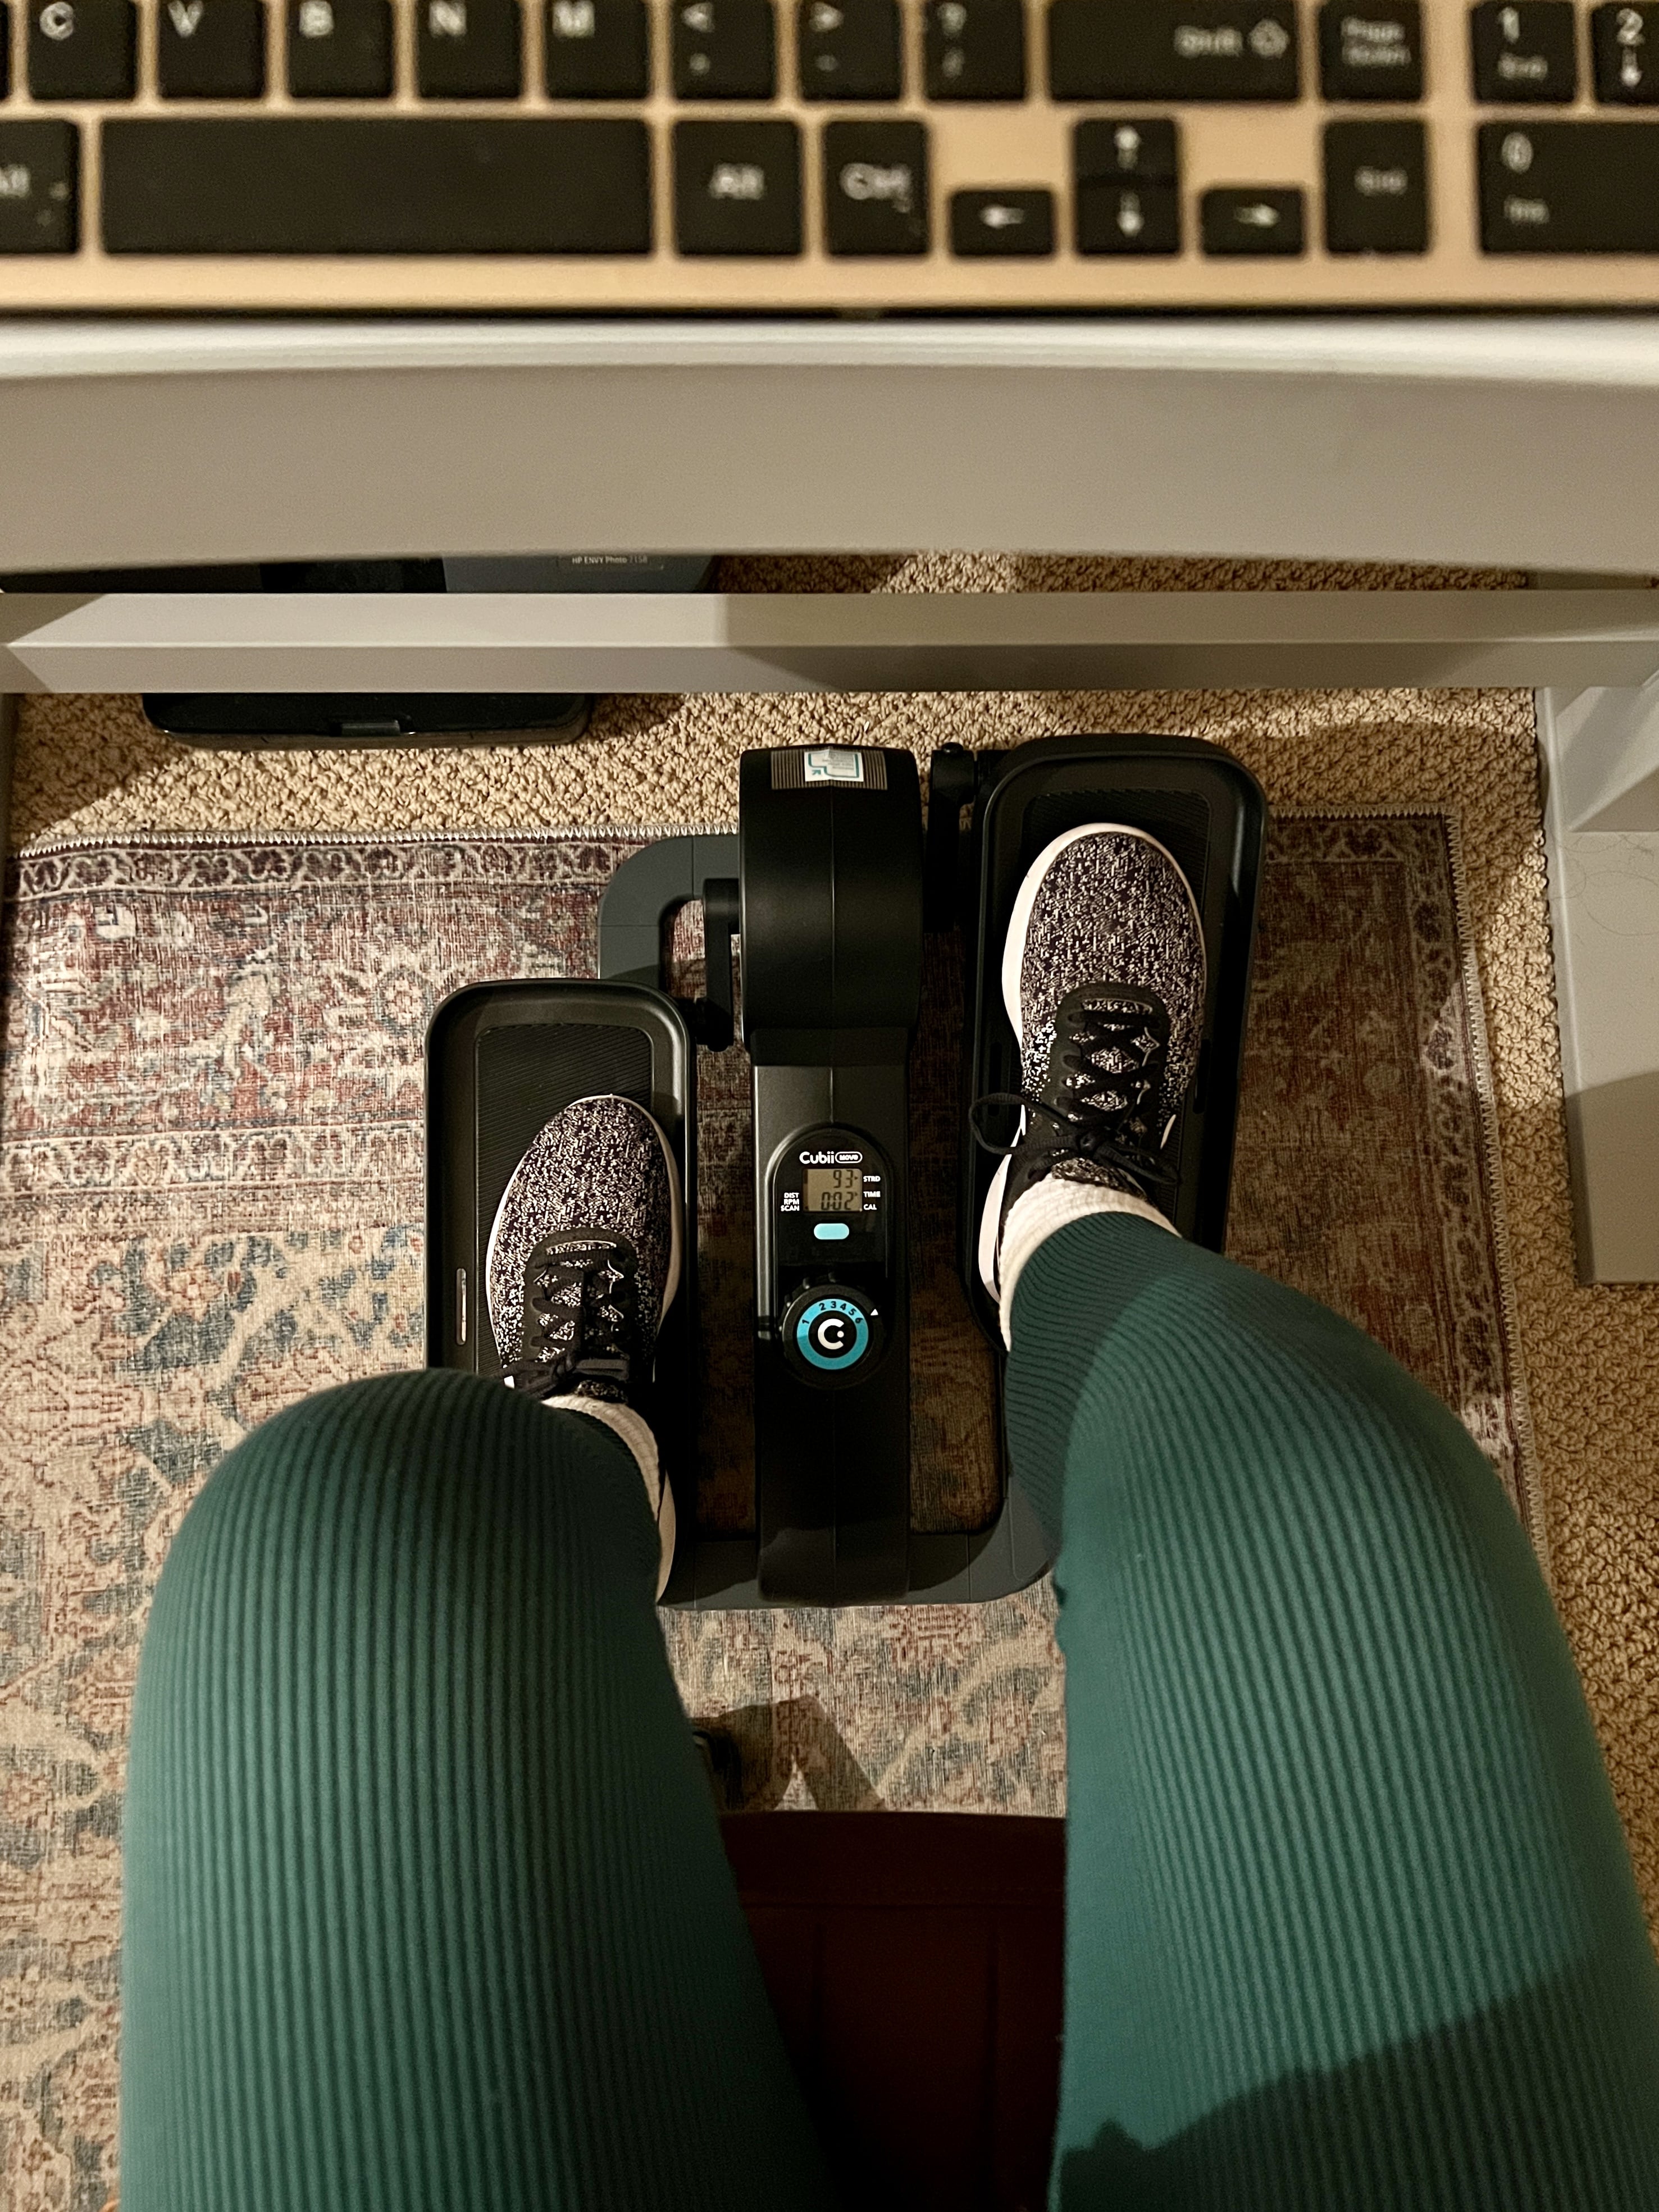 Do Under-Desk Ellipticals Really Work? The Pros and Cons